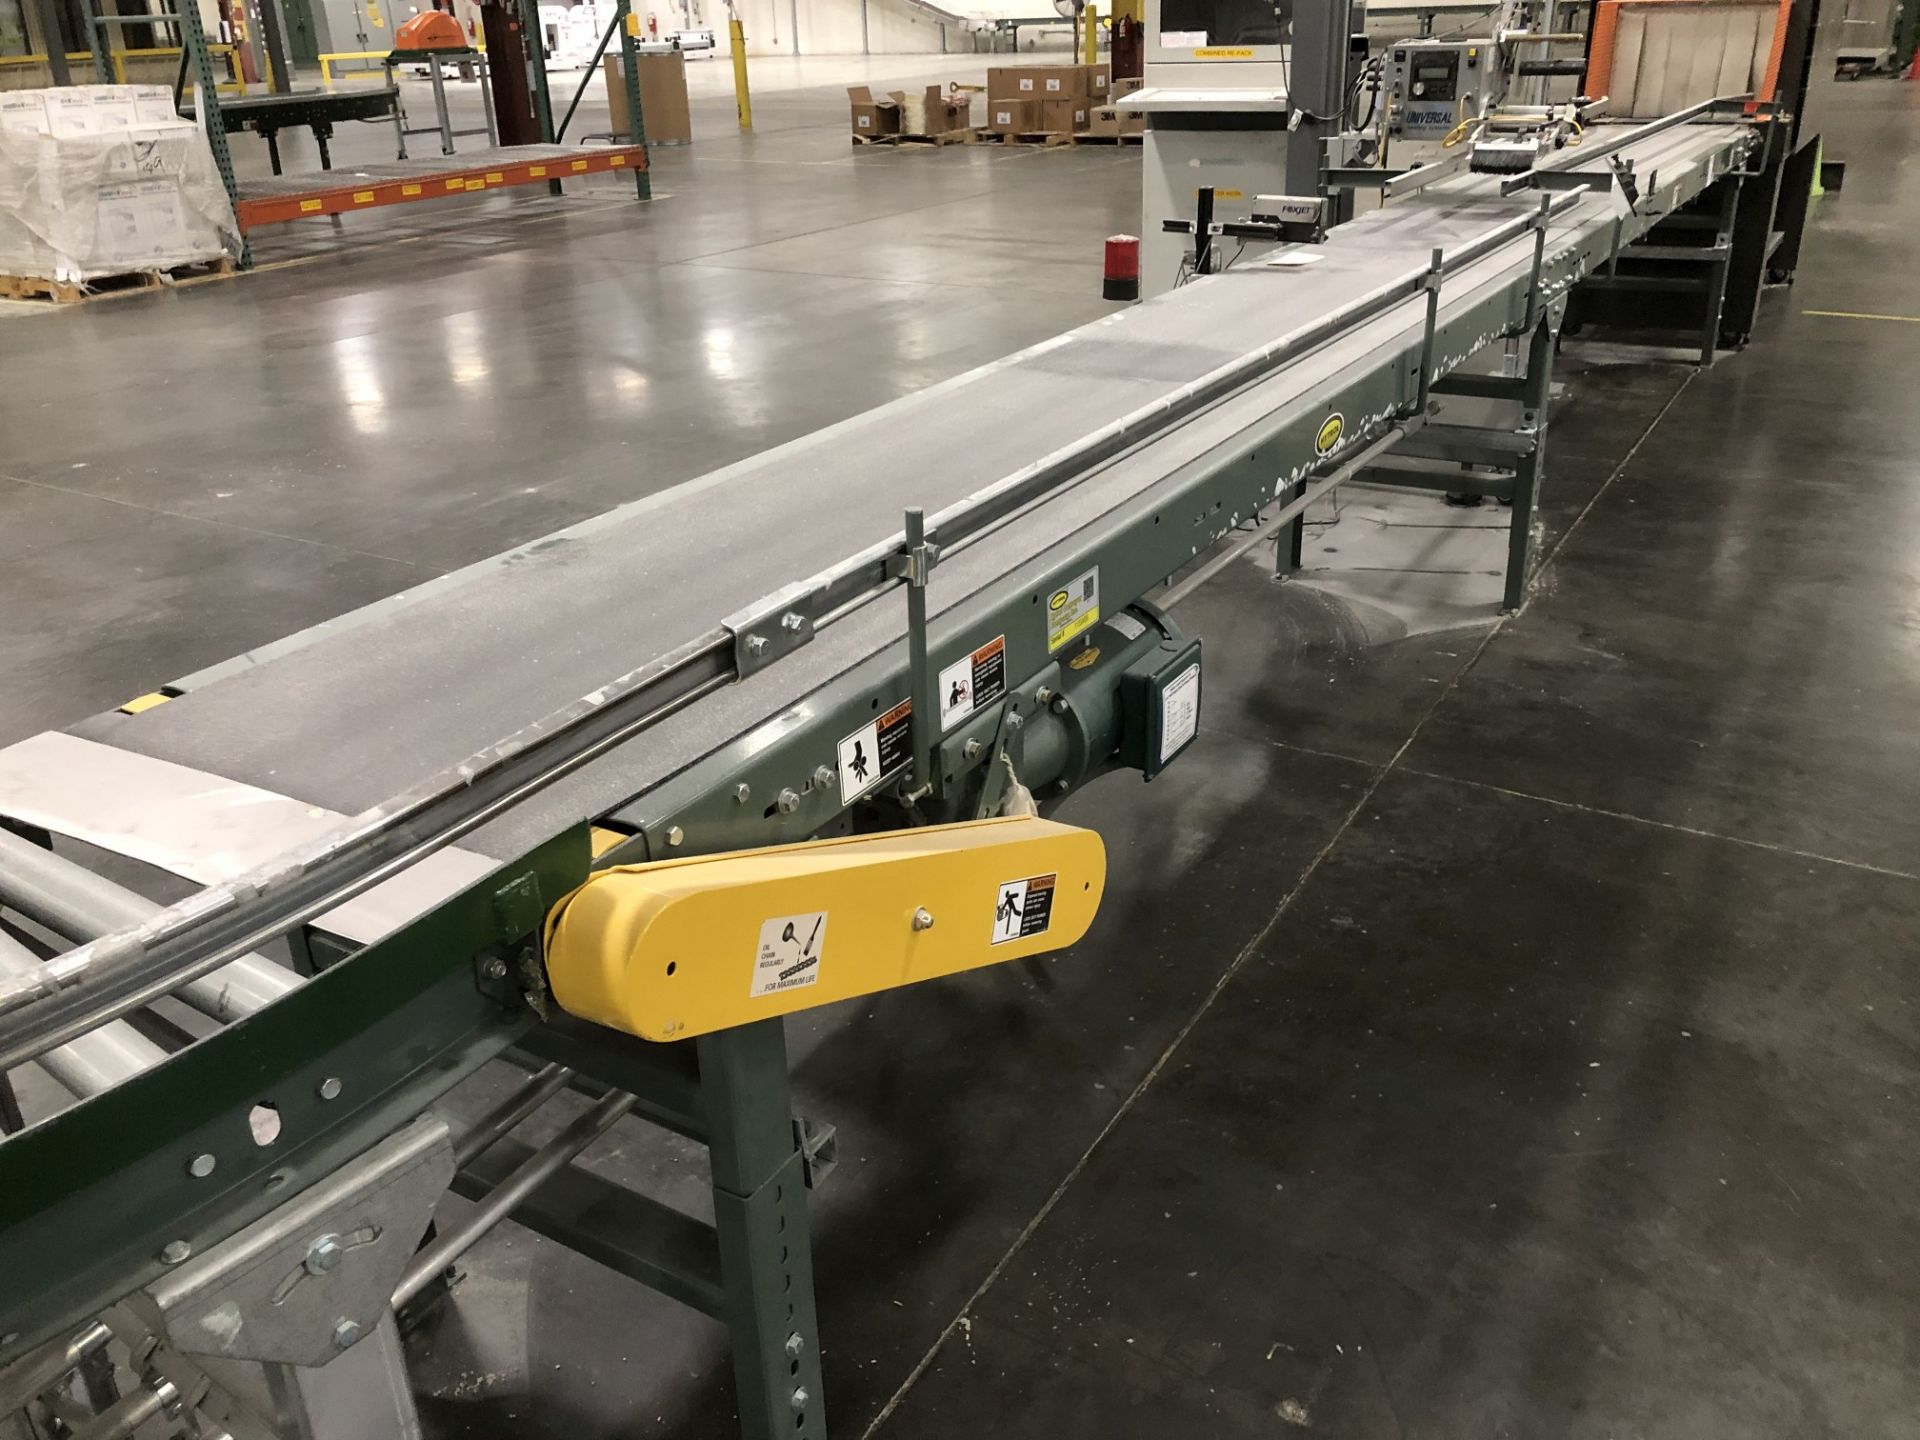 All Hytrol Conveyor Throughout Entire Site, Mostly 20" Wide Powered Roller Conveyor [Please - Image 50 of 80